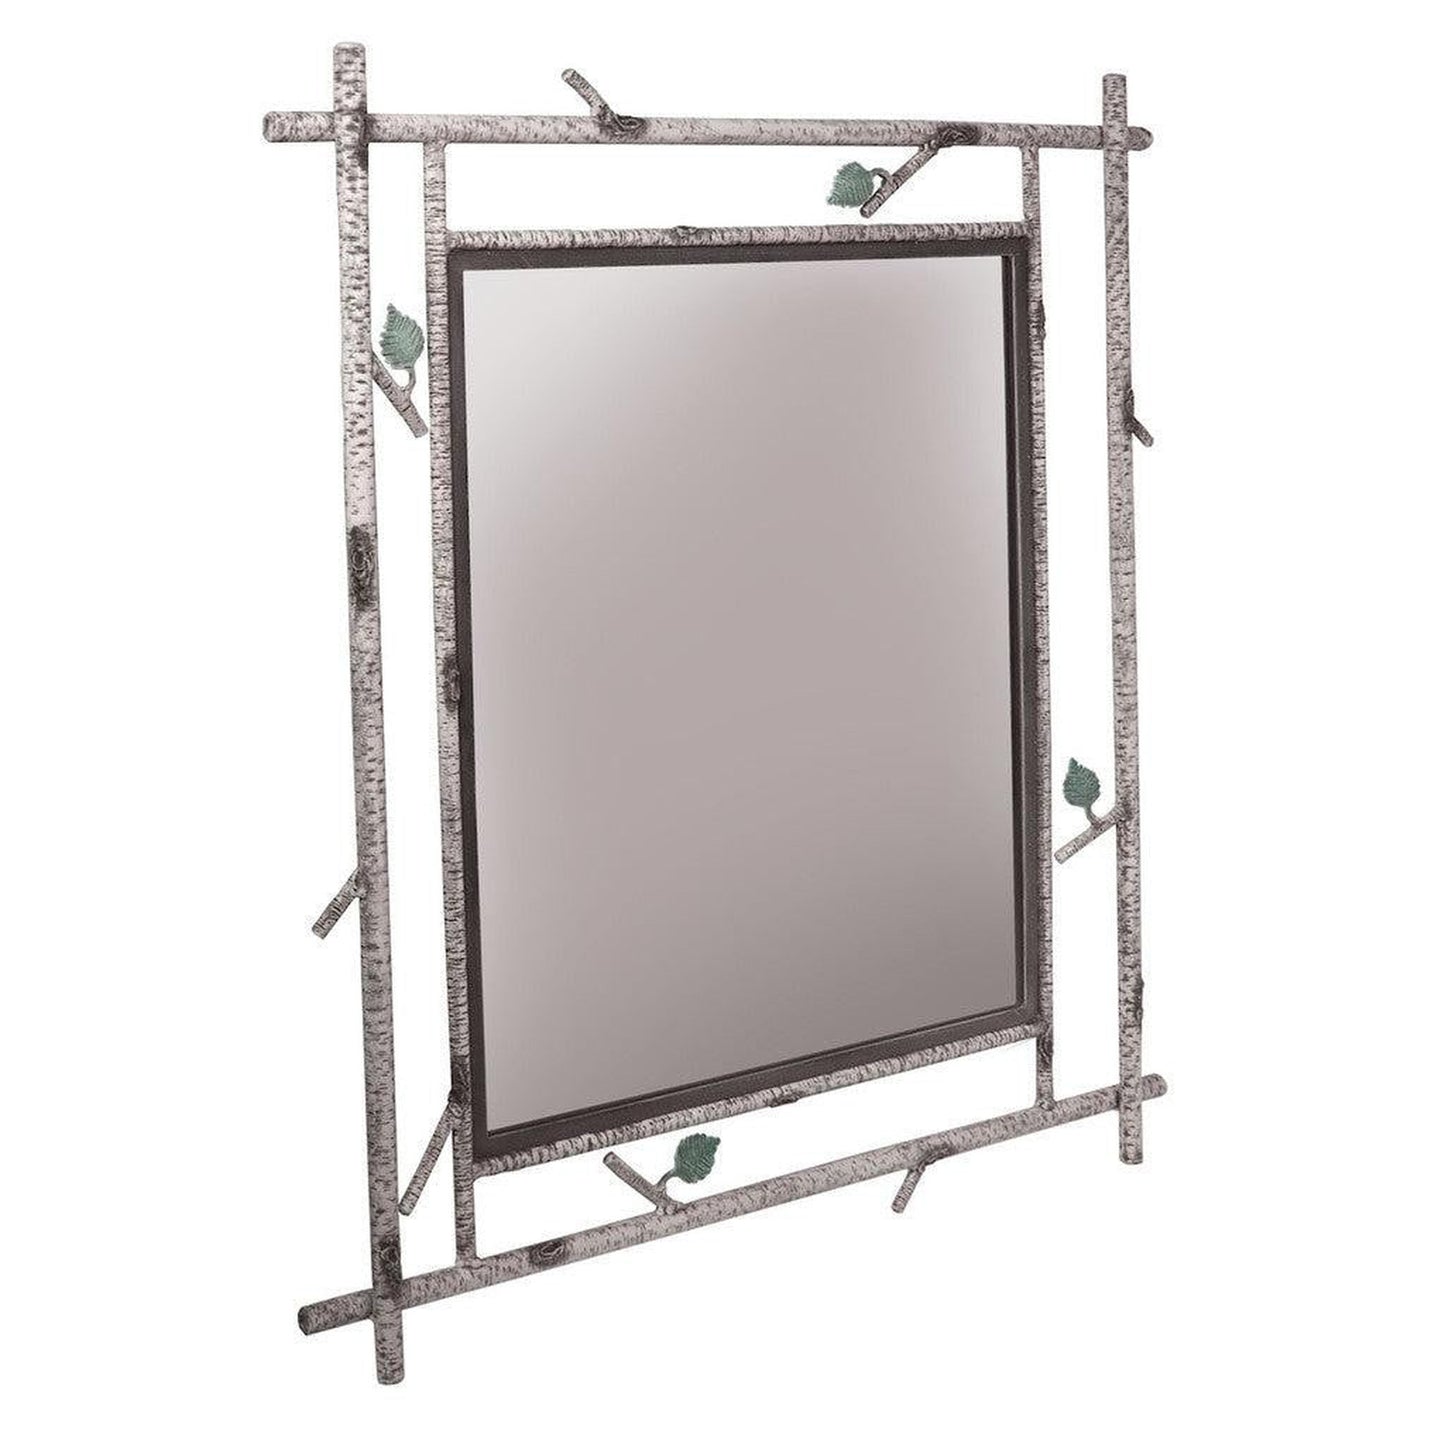 Stone County Ironworks Whisper Creek 30" x 34" Small Woodland Brown Iron Wall Mirror With Gold Iron Accent